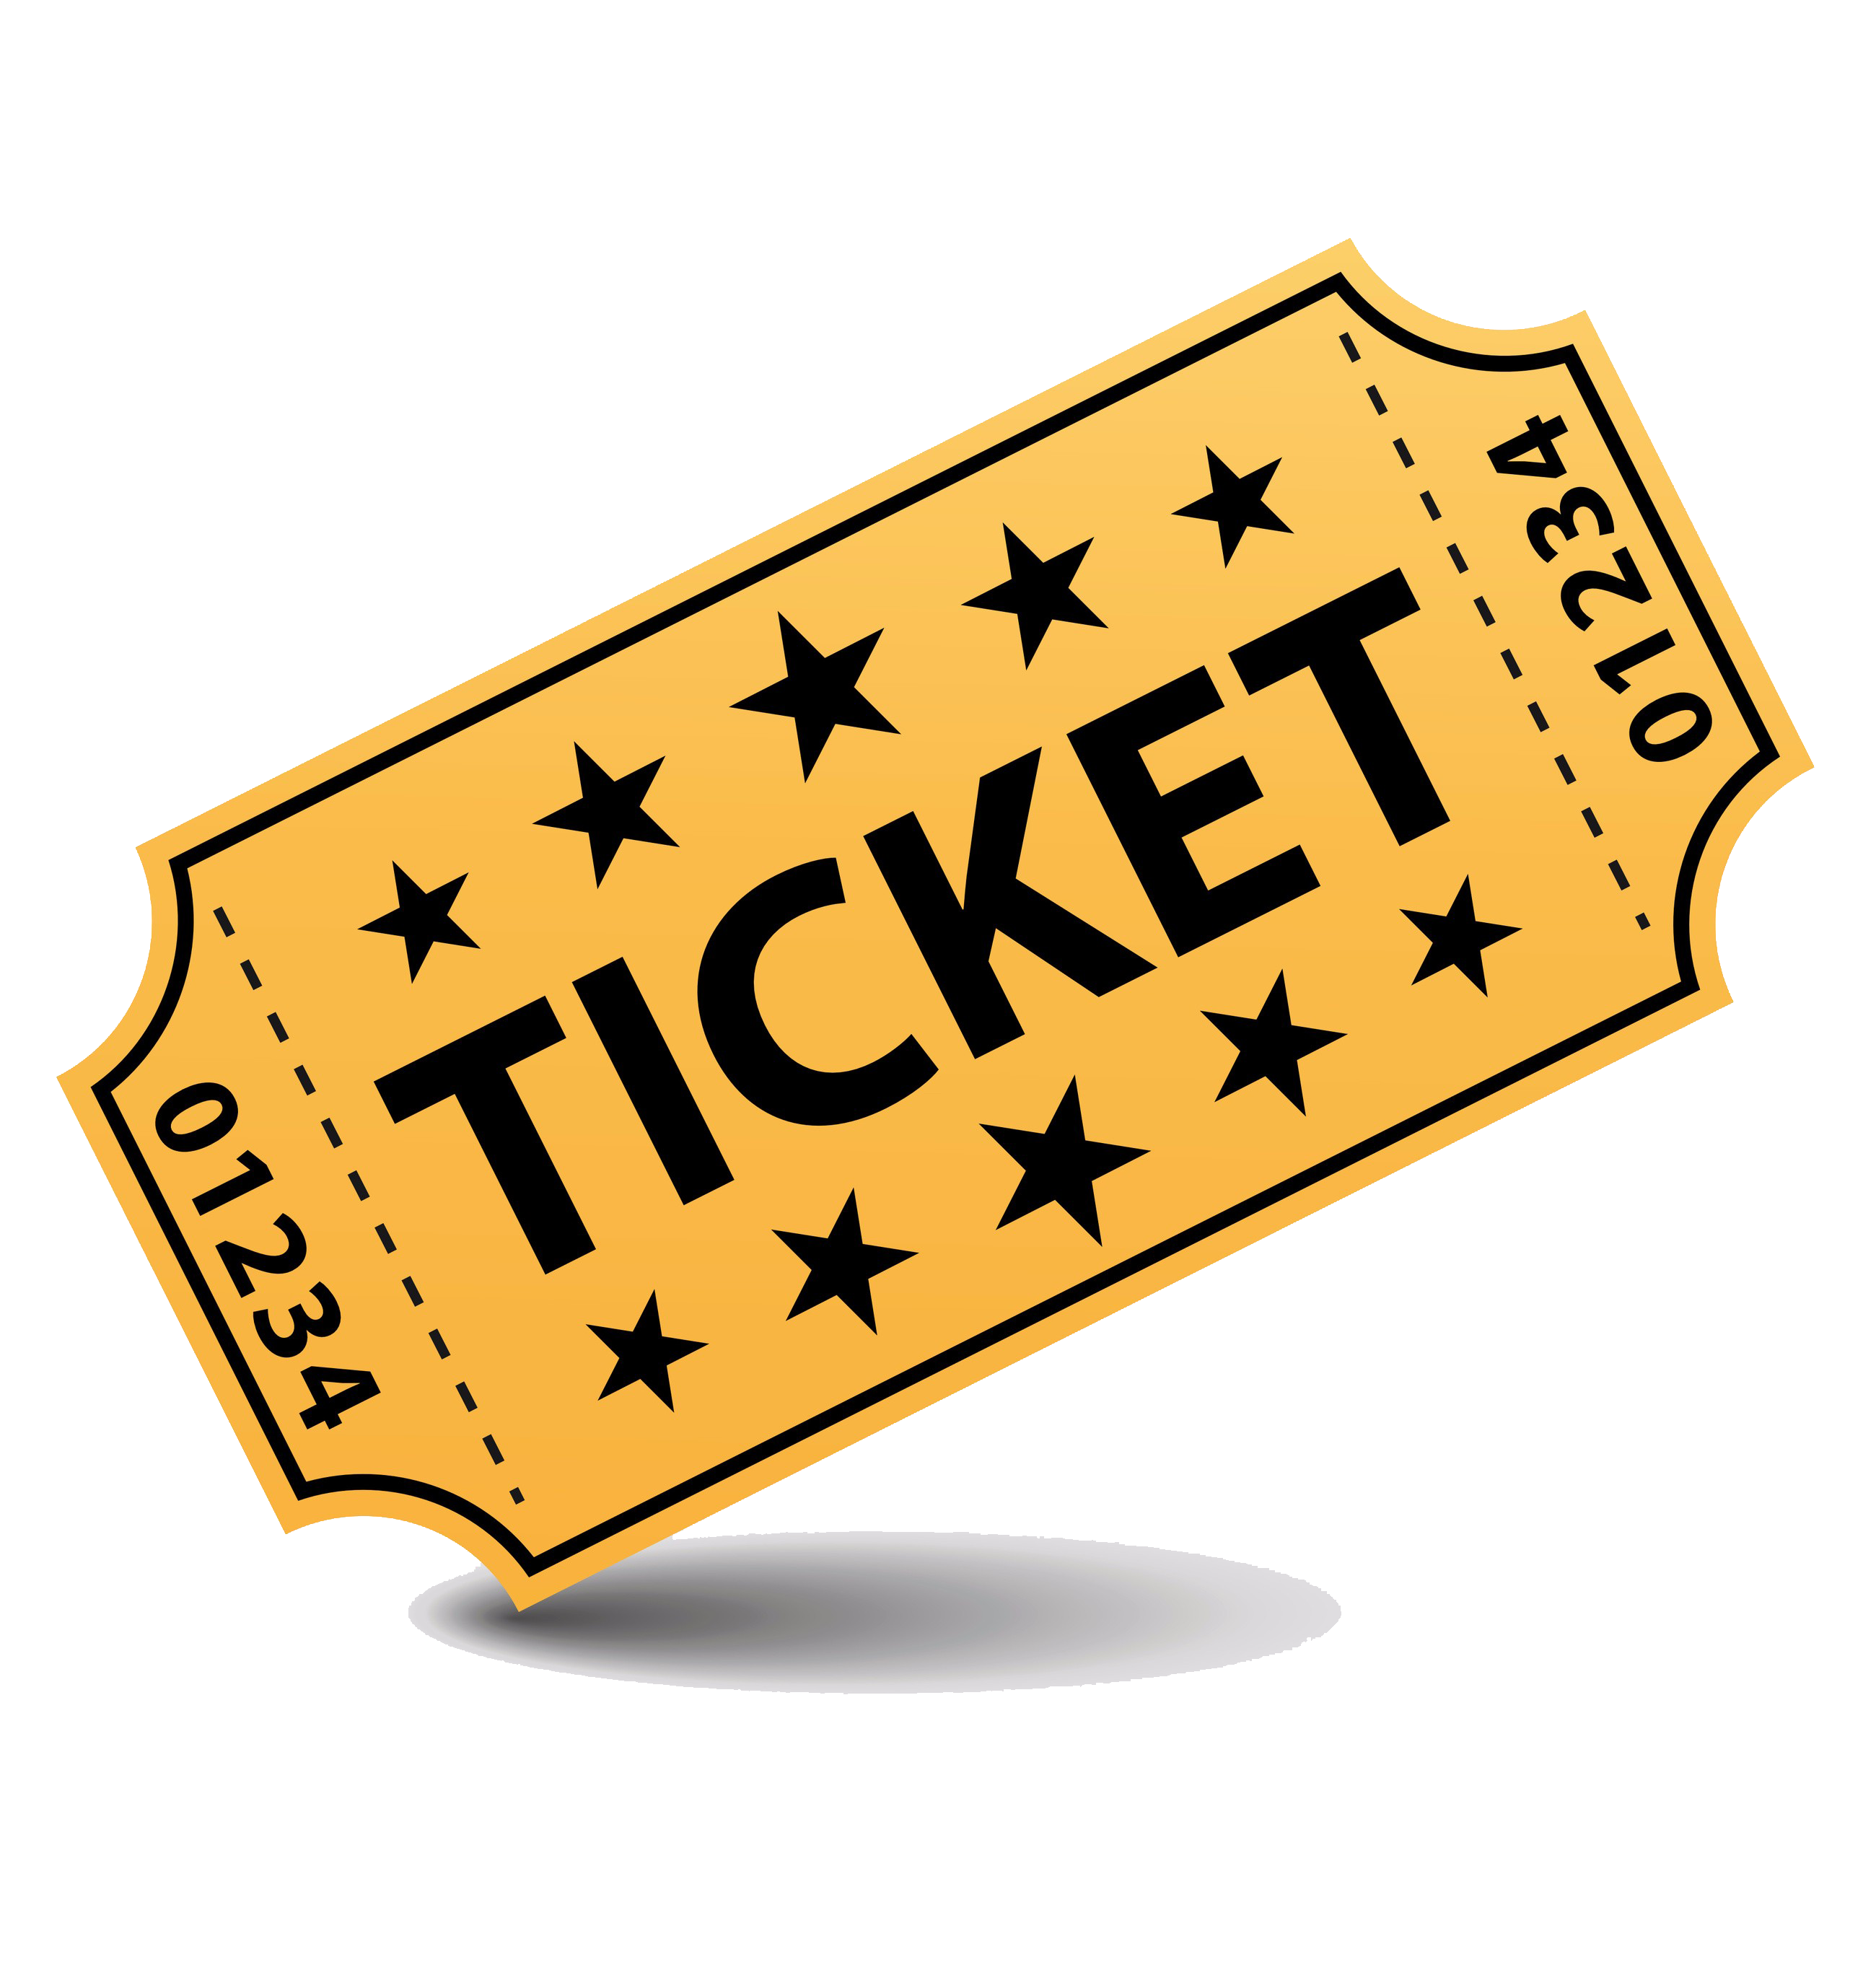 Ticket clipart yellow, Ticket yellow Transparent FREE for